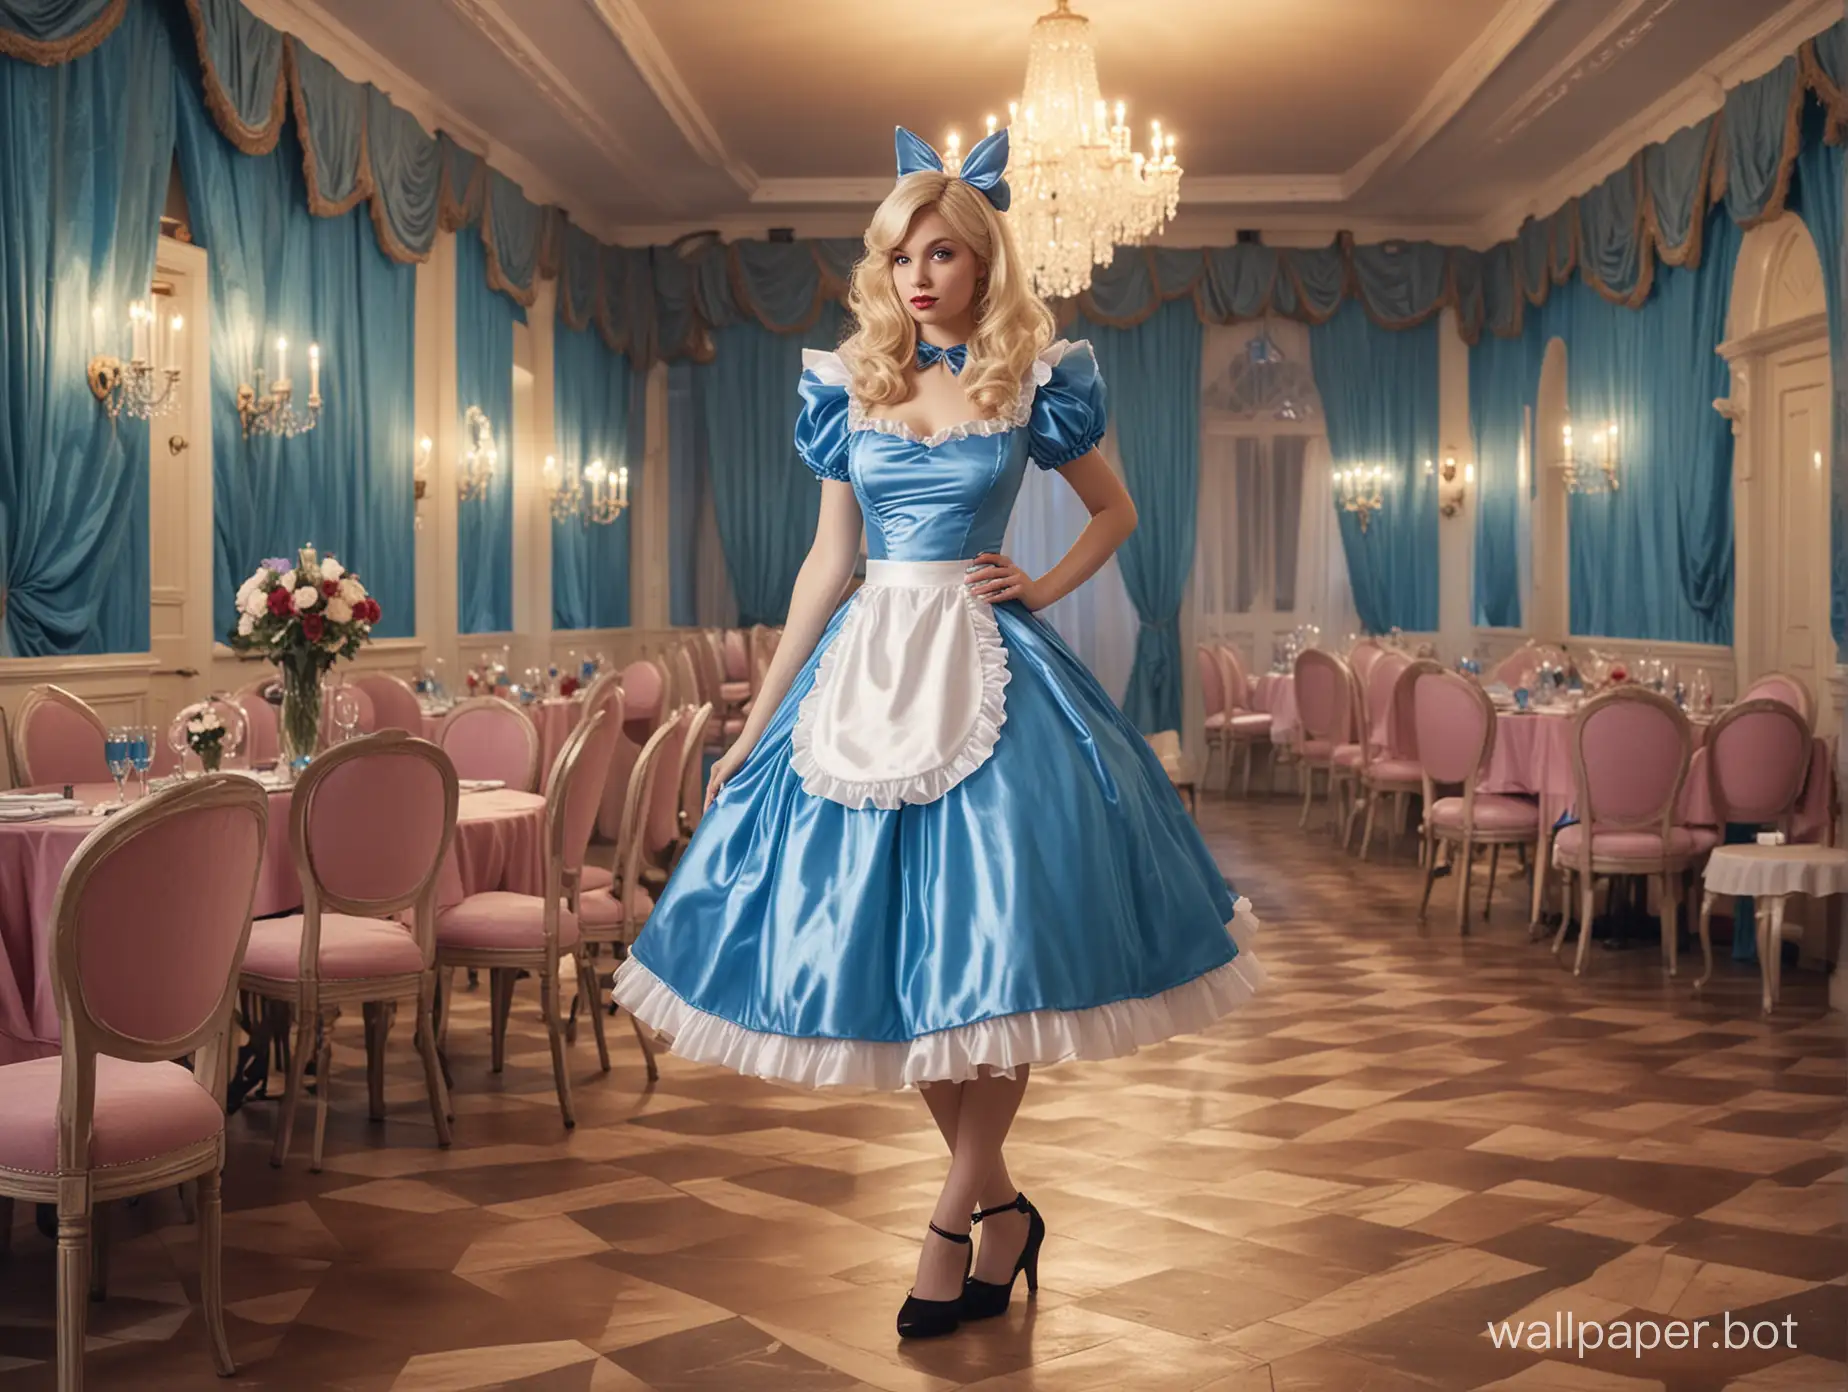 Cosplaying-Disneys-Alice-in-Wonderland-at-80s-Prom-Whimsical-Banquet-Hall-Portrait